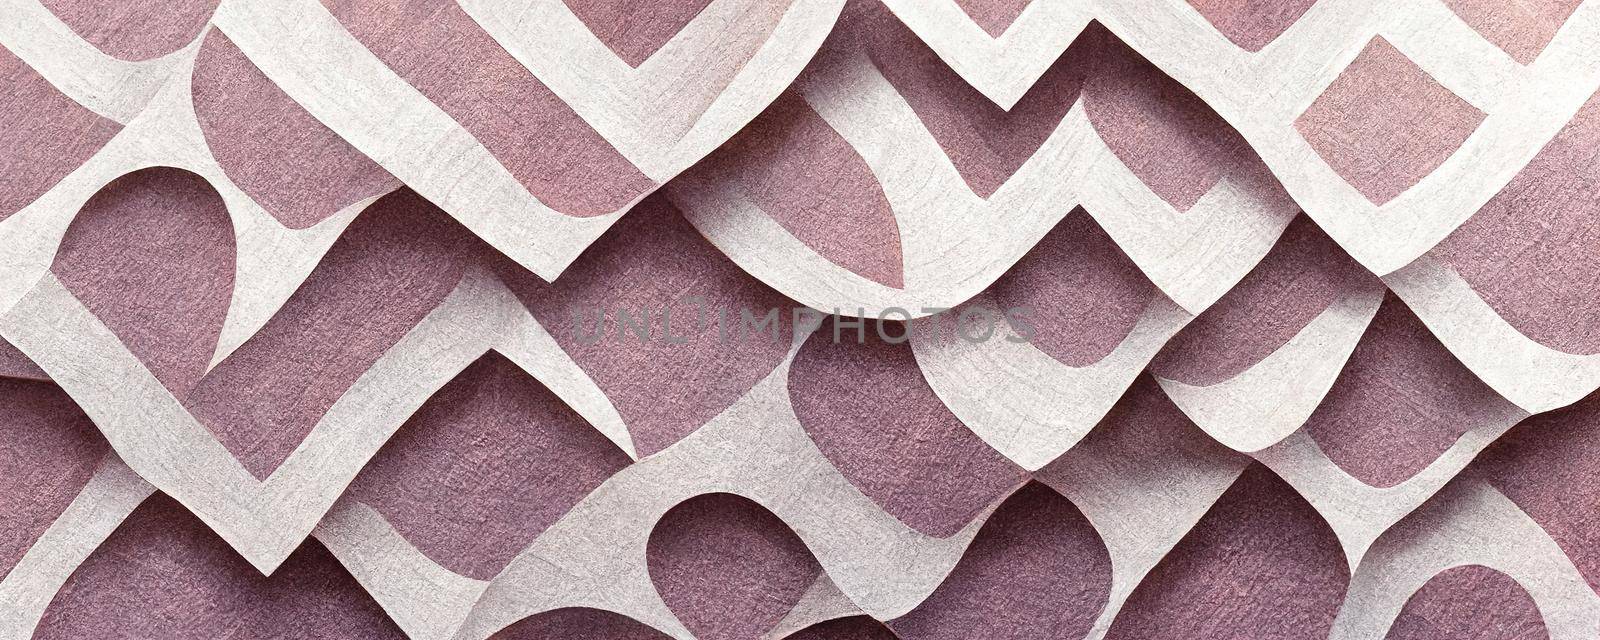 paper cut out pattern, Colorful abstract wallpaper texture background illustration by TRMK